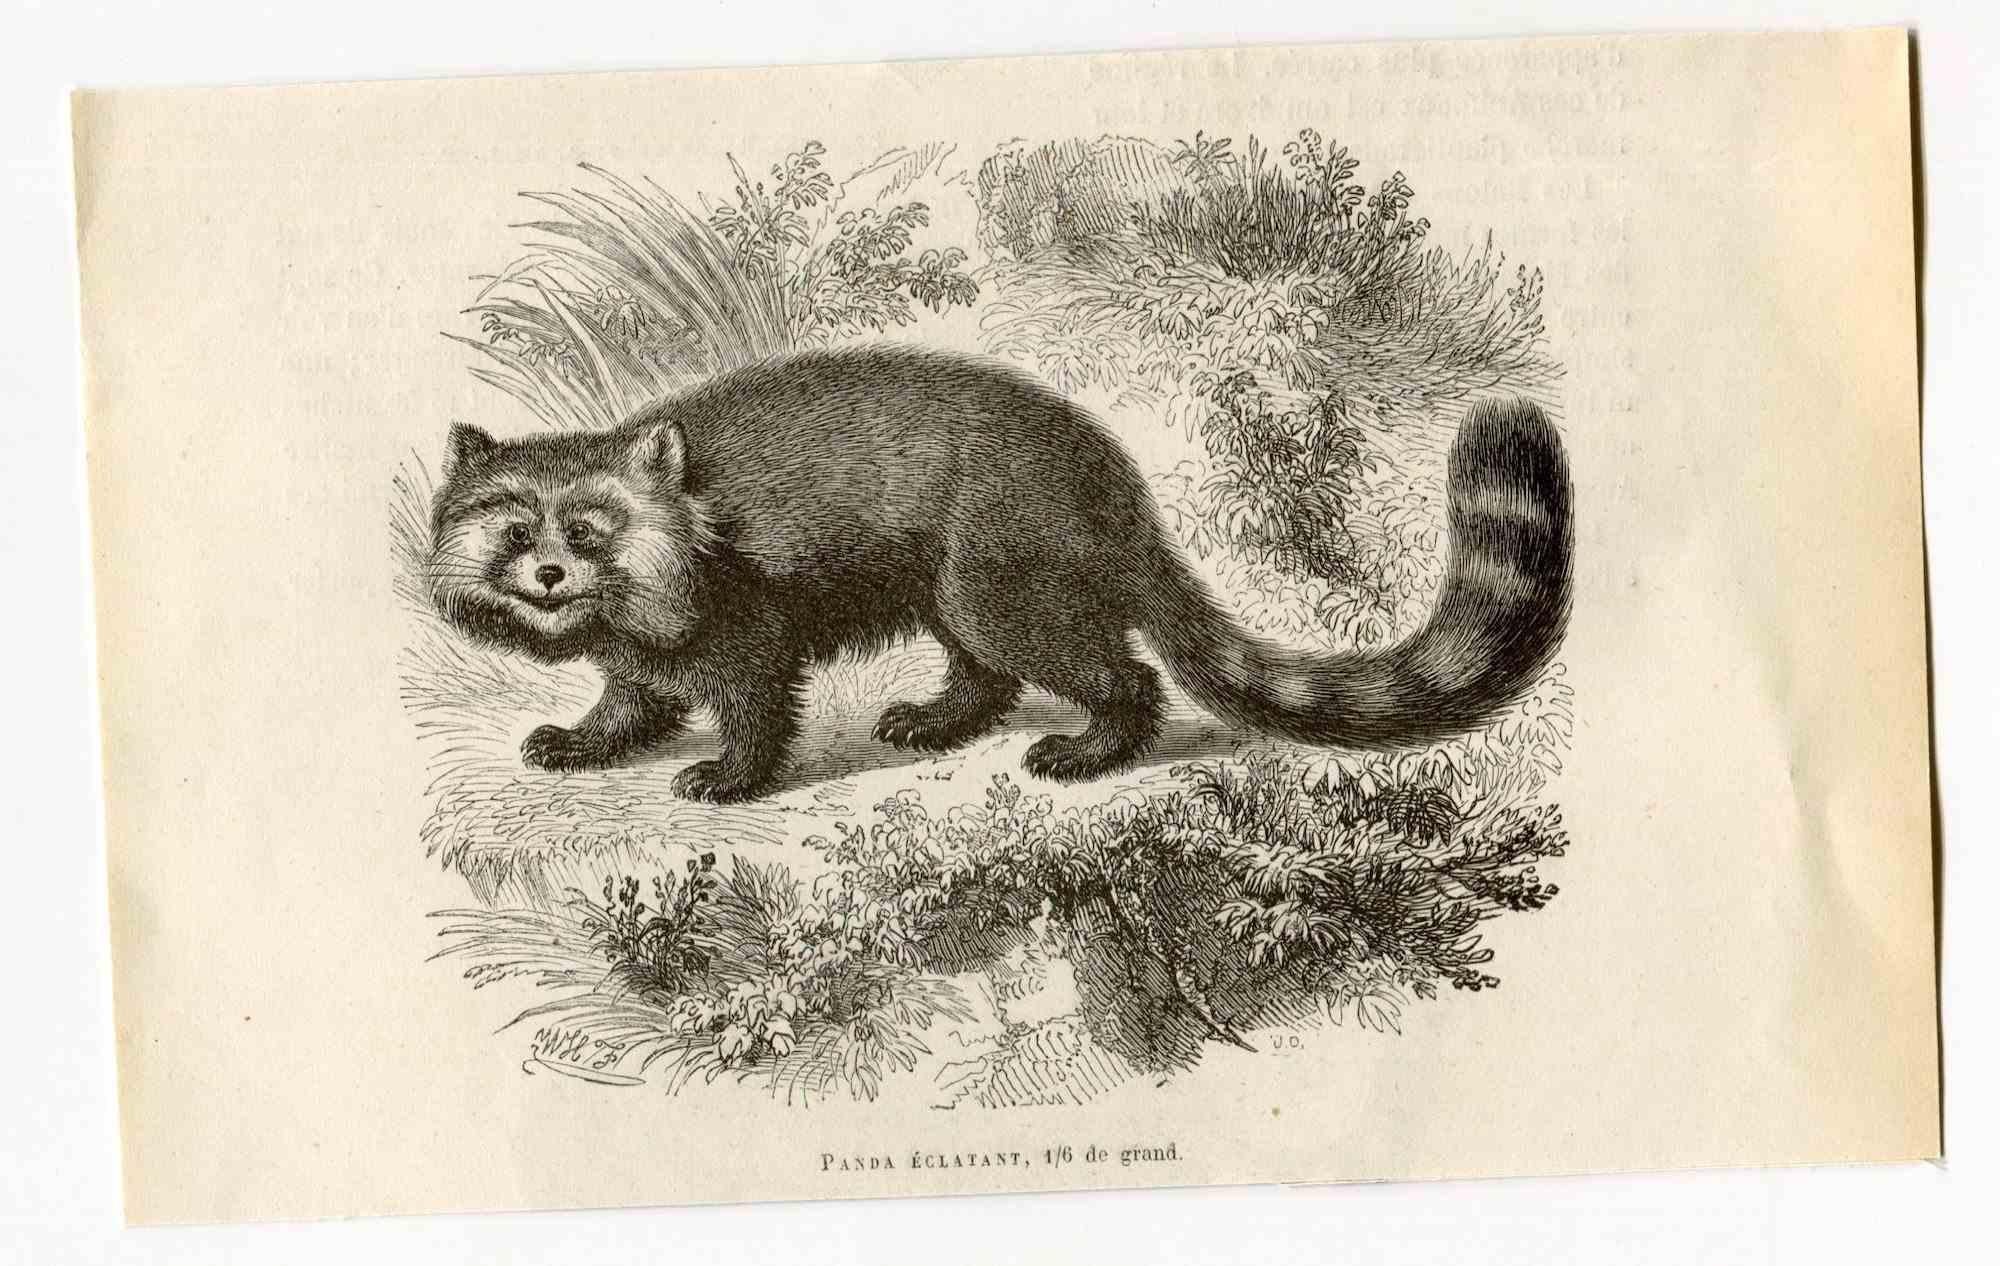 Red Panda - Lithograph by Paul Gervais - 1854